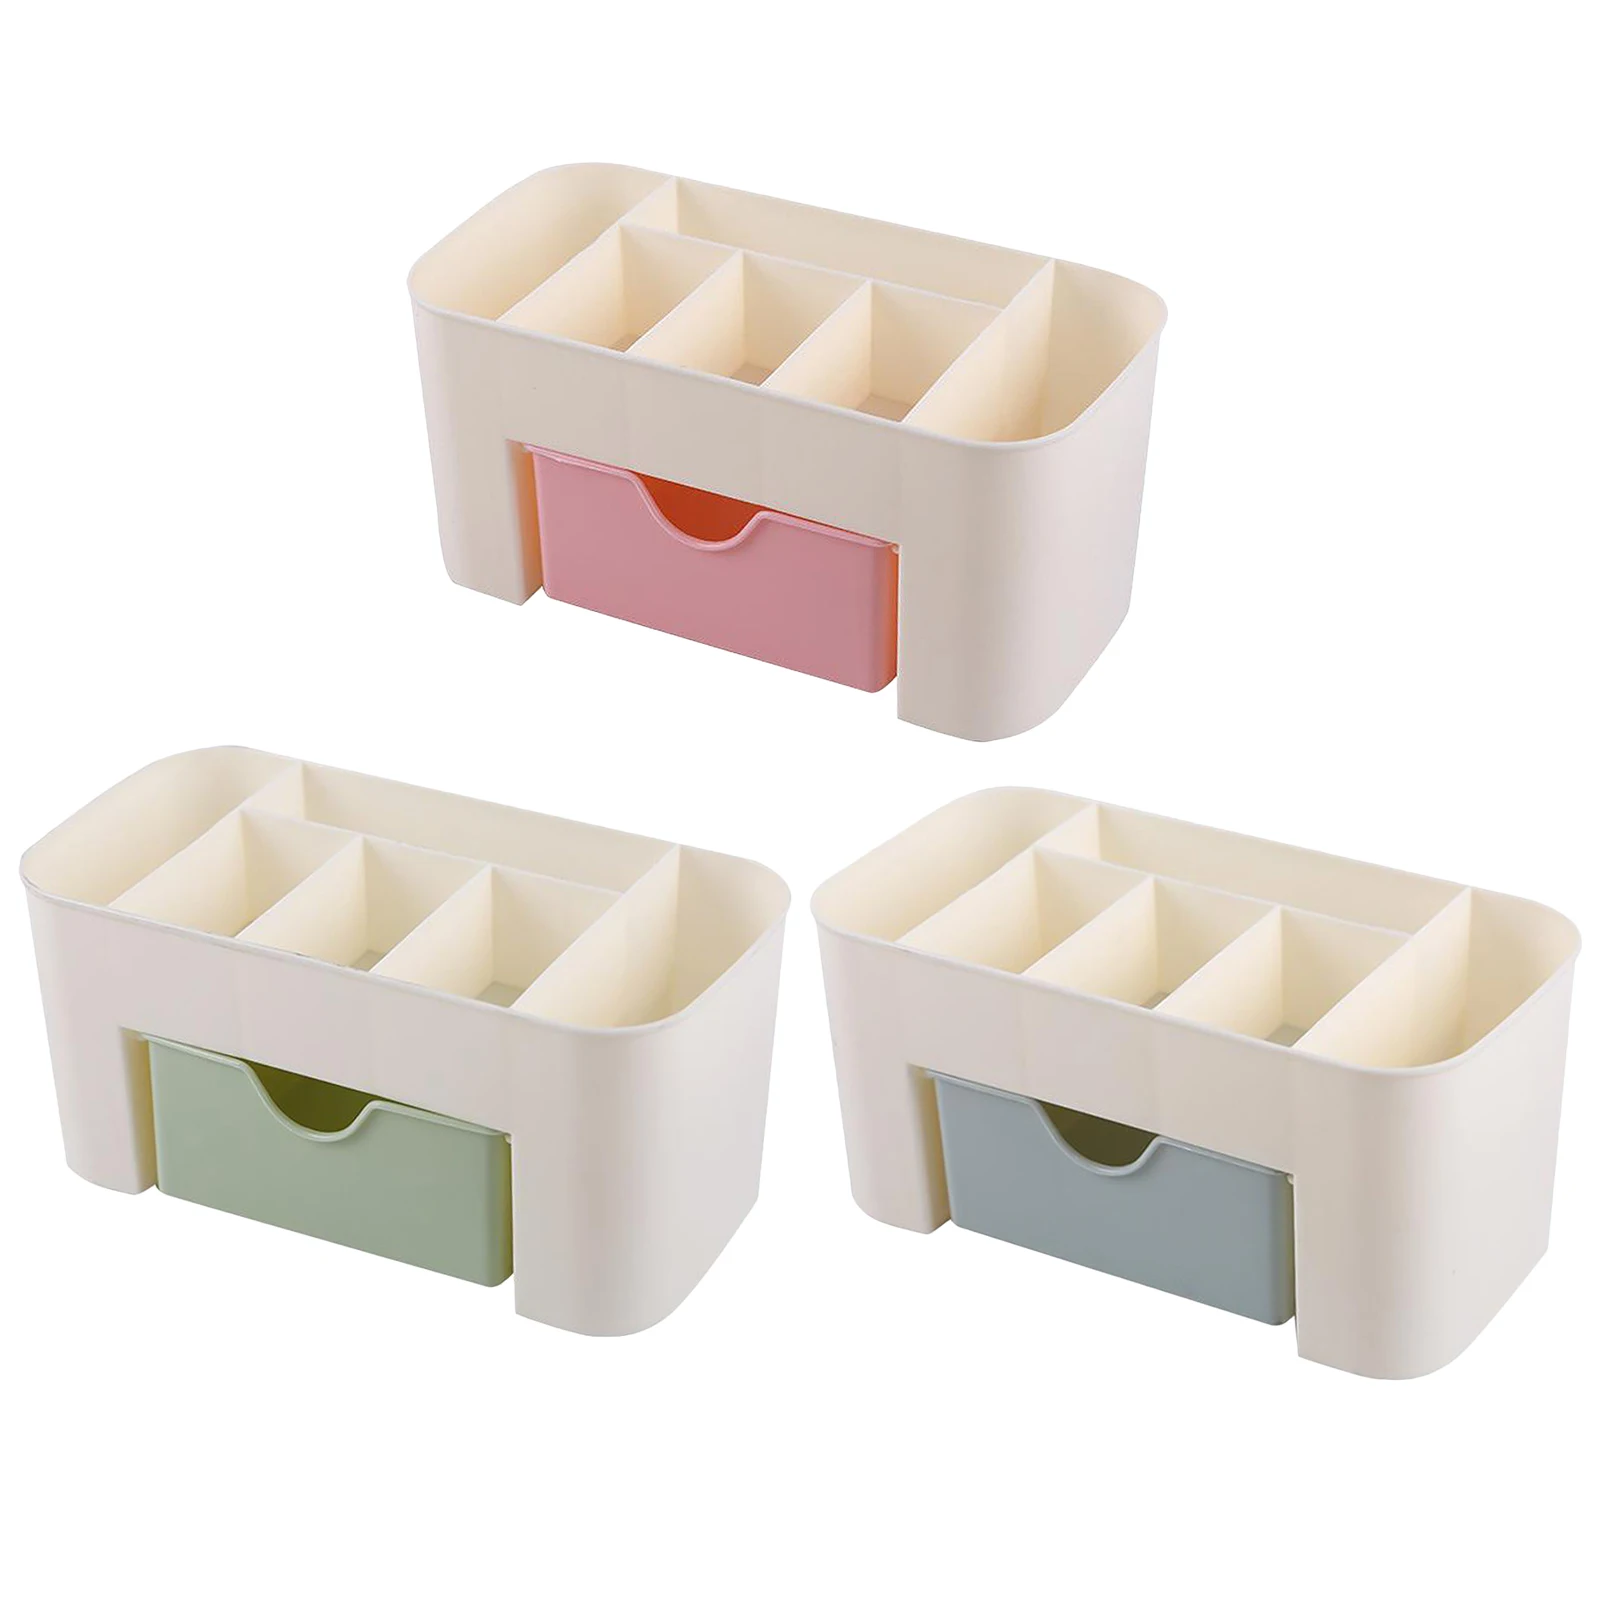 Plastic Cosmetic Makeup Accessories Organiser with Drawer Makeup Jewelry Display Box